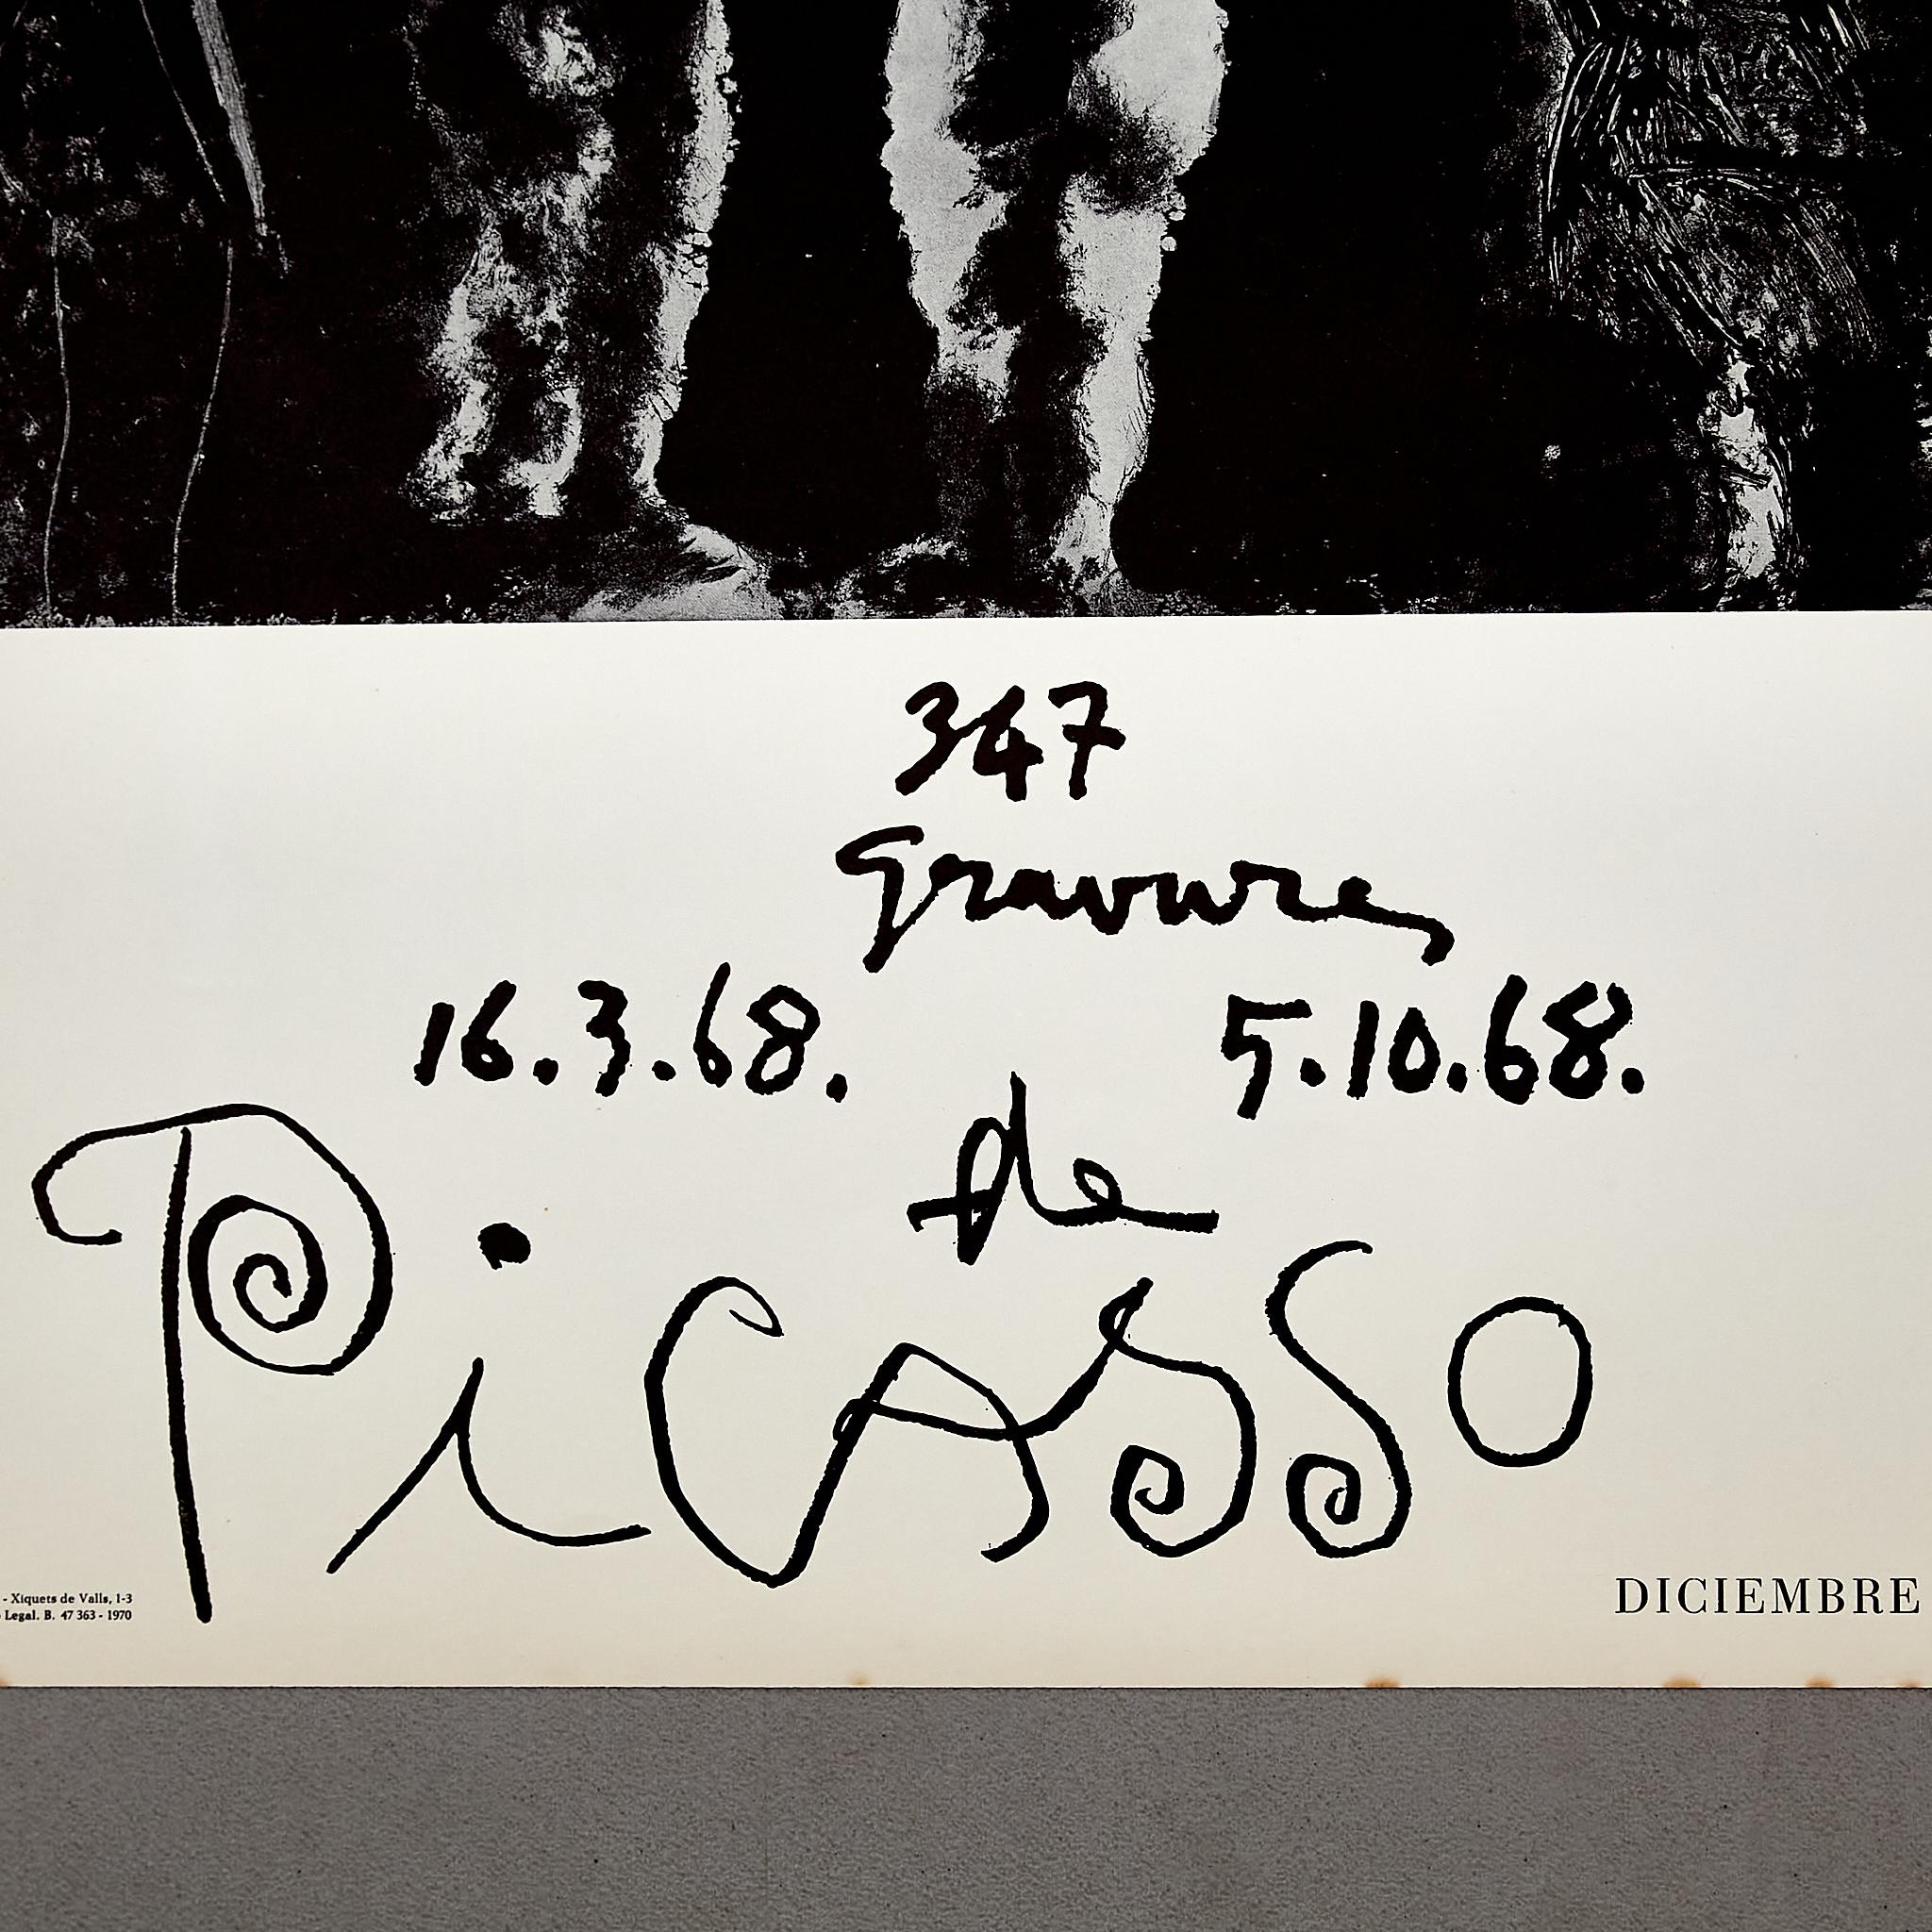 Pablo Picasso Vintage Black and White Lithographic Exhibition Poster, 1968 For Sale 1